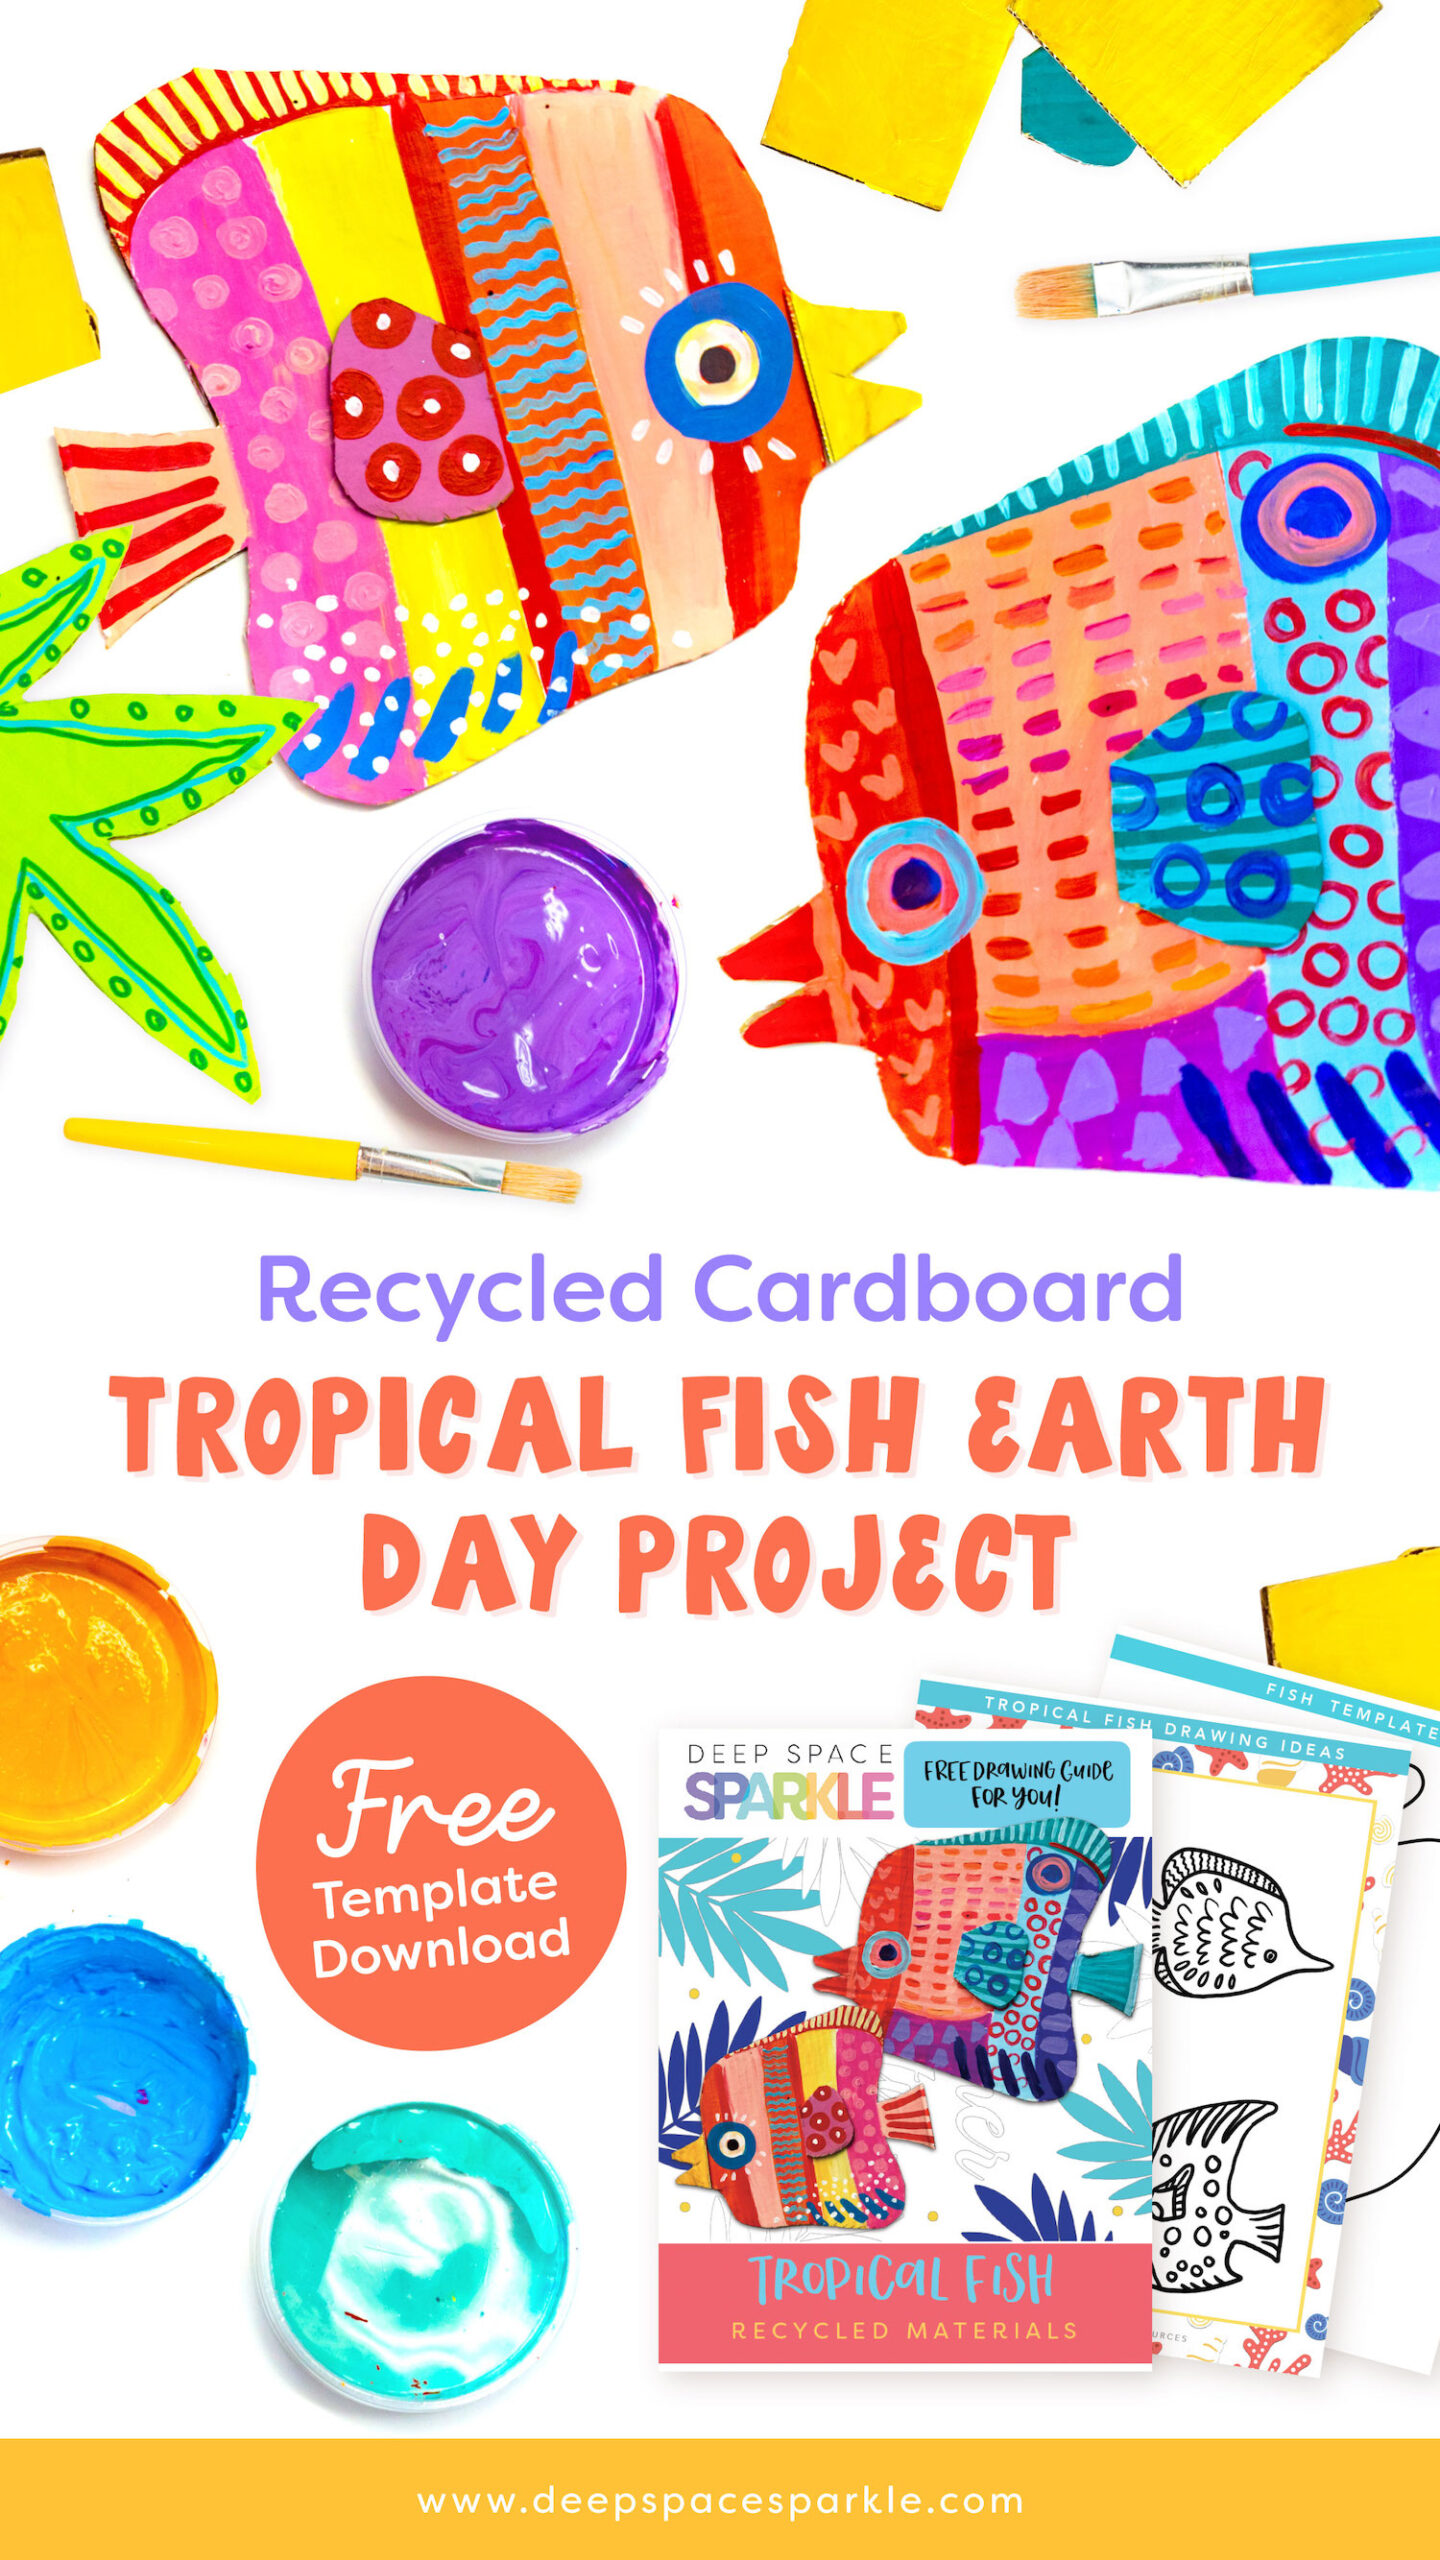 RECYCLED Tropical fish art project for Earth Day